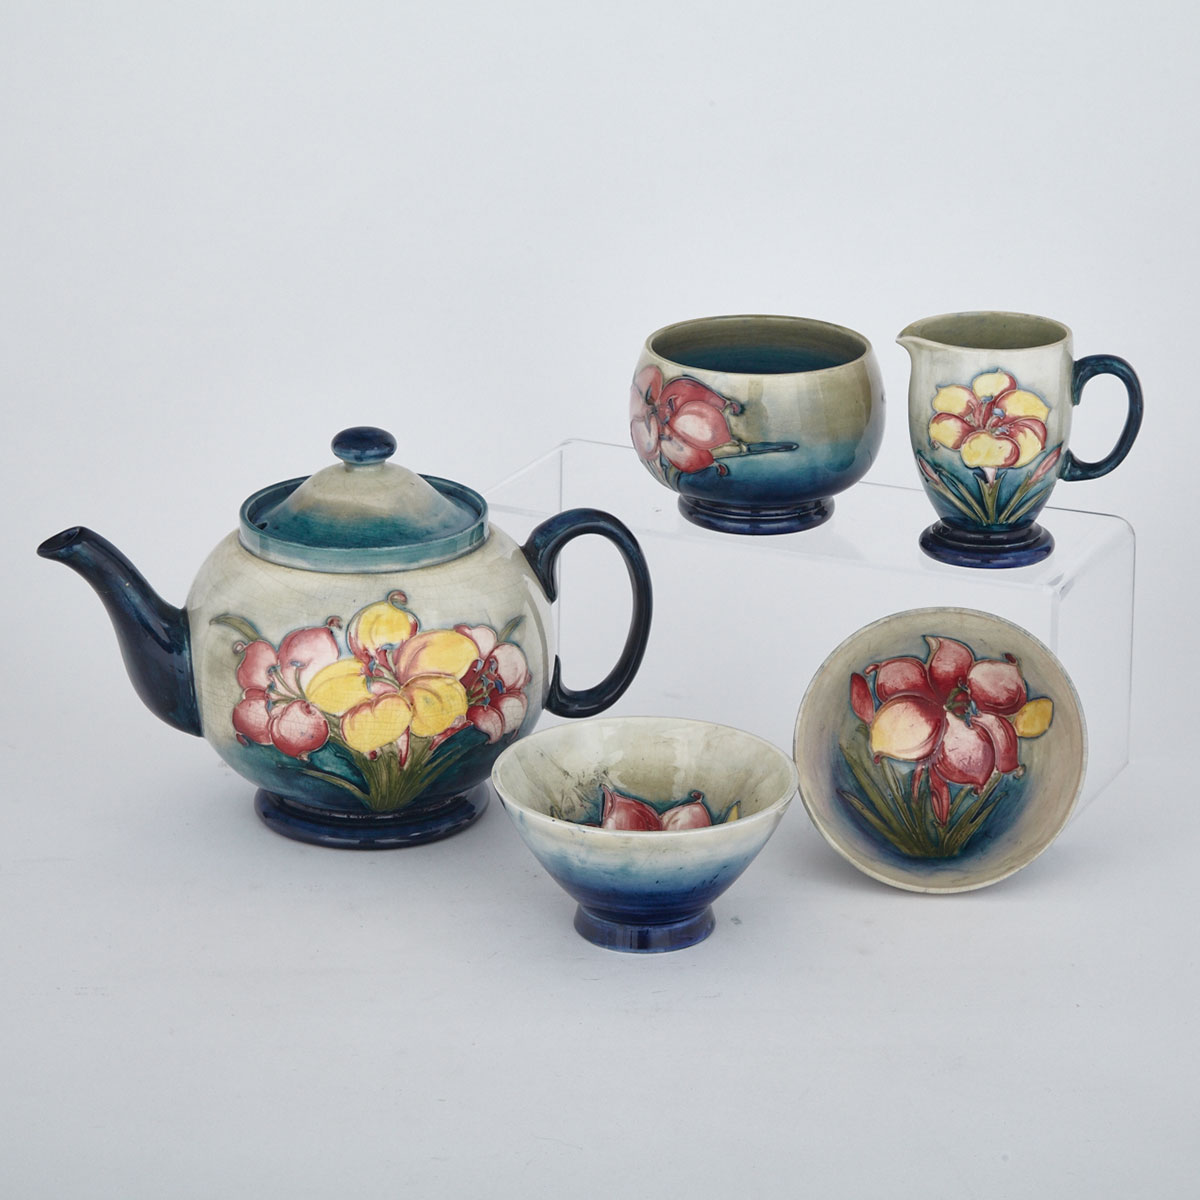 Moorcroft ‘African Lily’ Three Piece Tea Service and Two Small Bowls, 1940s